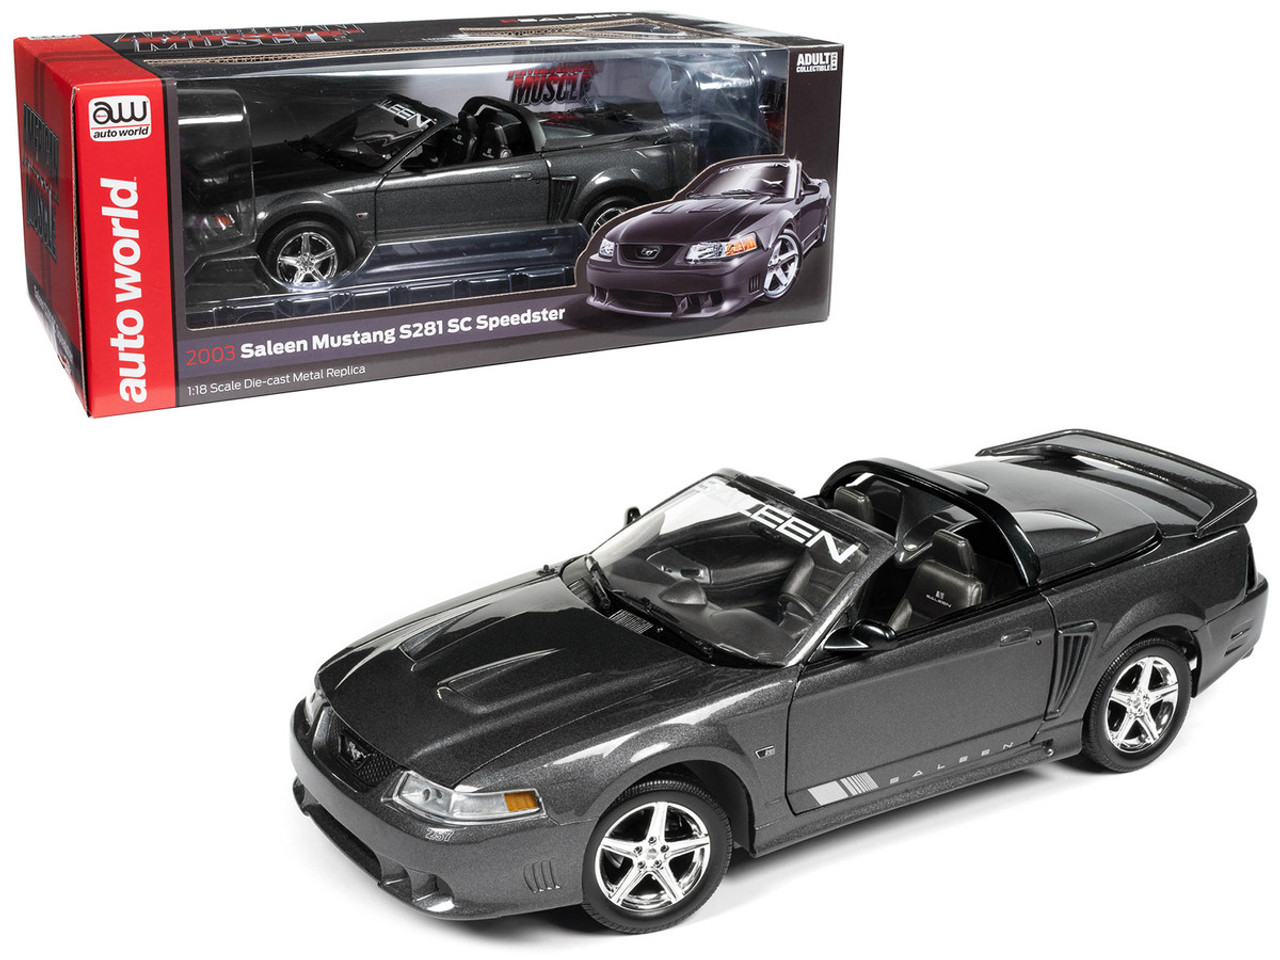 2003 Ford Mustang Saleen S281 SC Speedster Dark Shadow Gray Metallic American Muscle Series 1/18 Diecast Model Car by Auto World